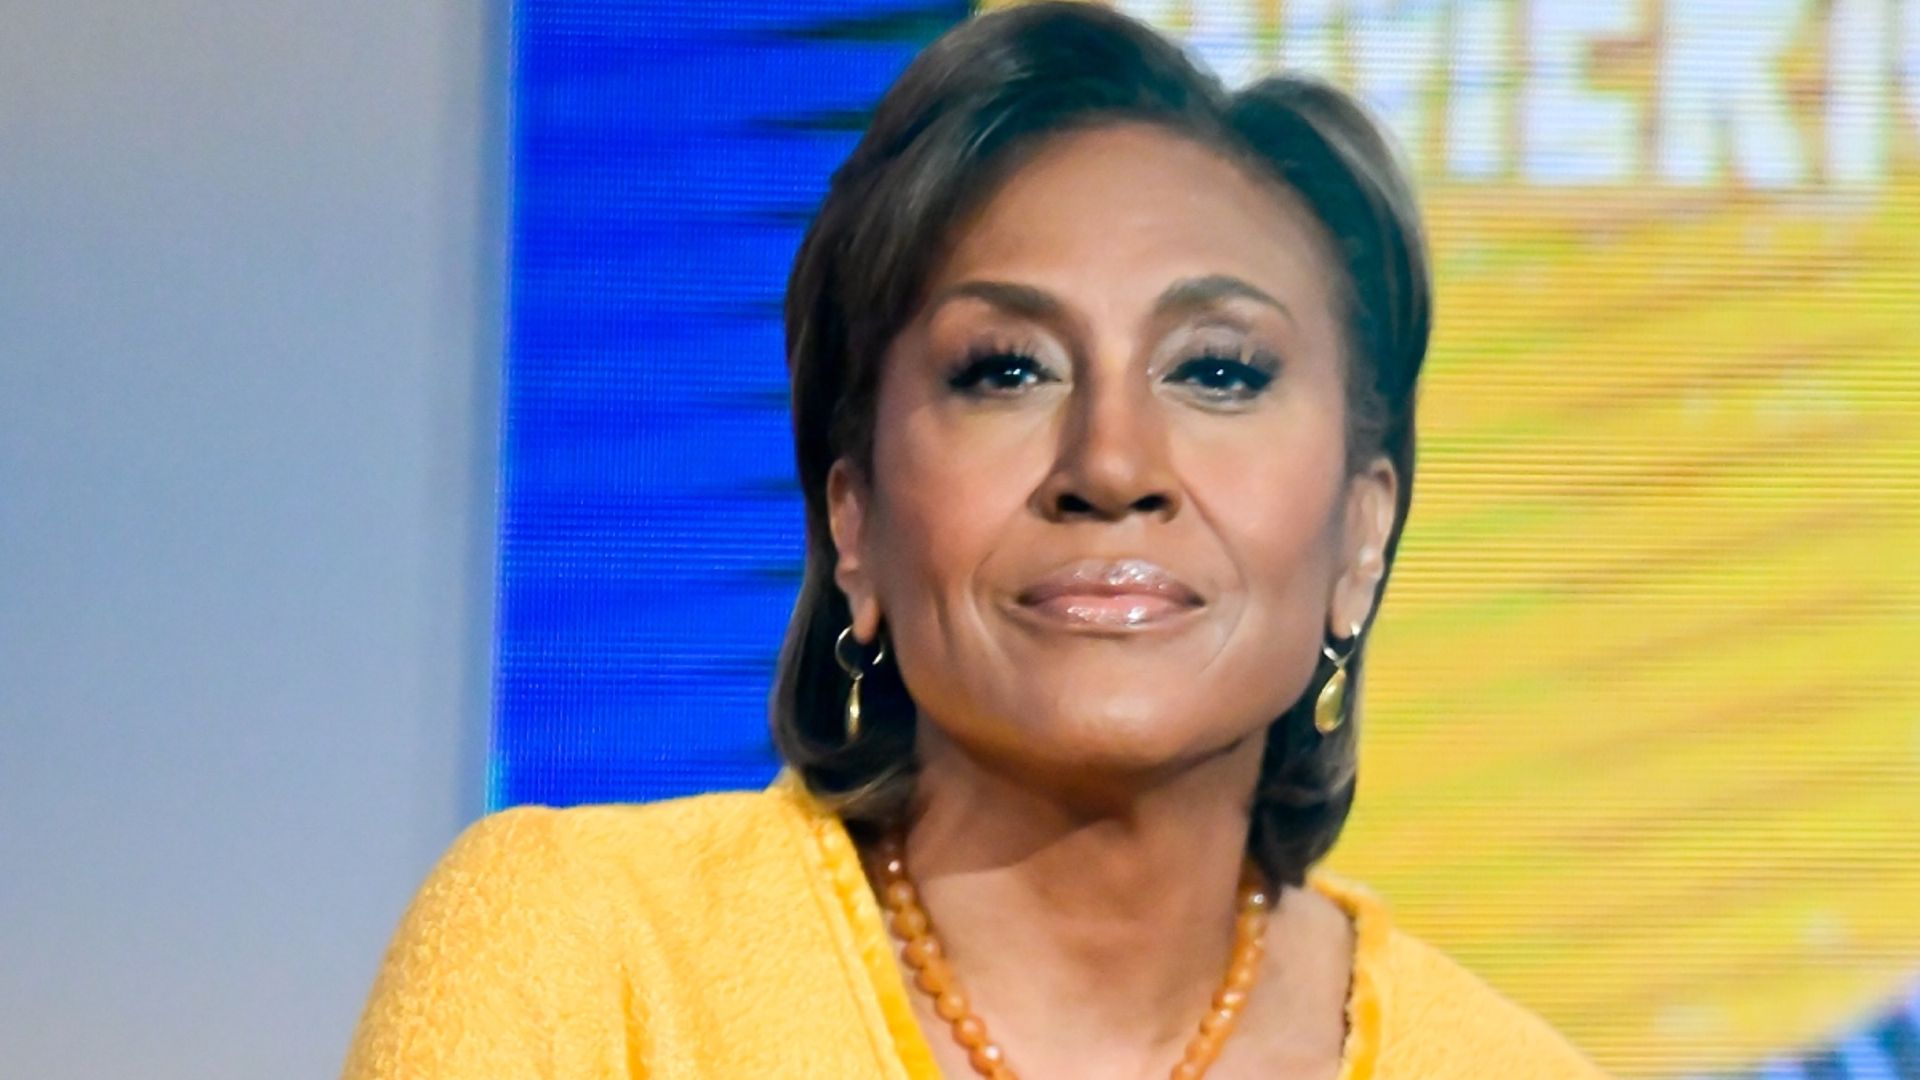 Robin Roberts delivers heartfelt tribute to Charles McGee after tragic loss